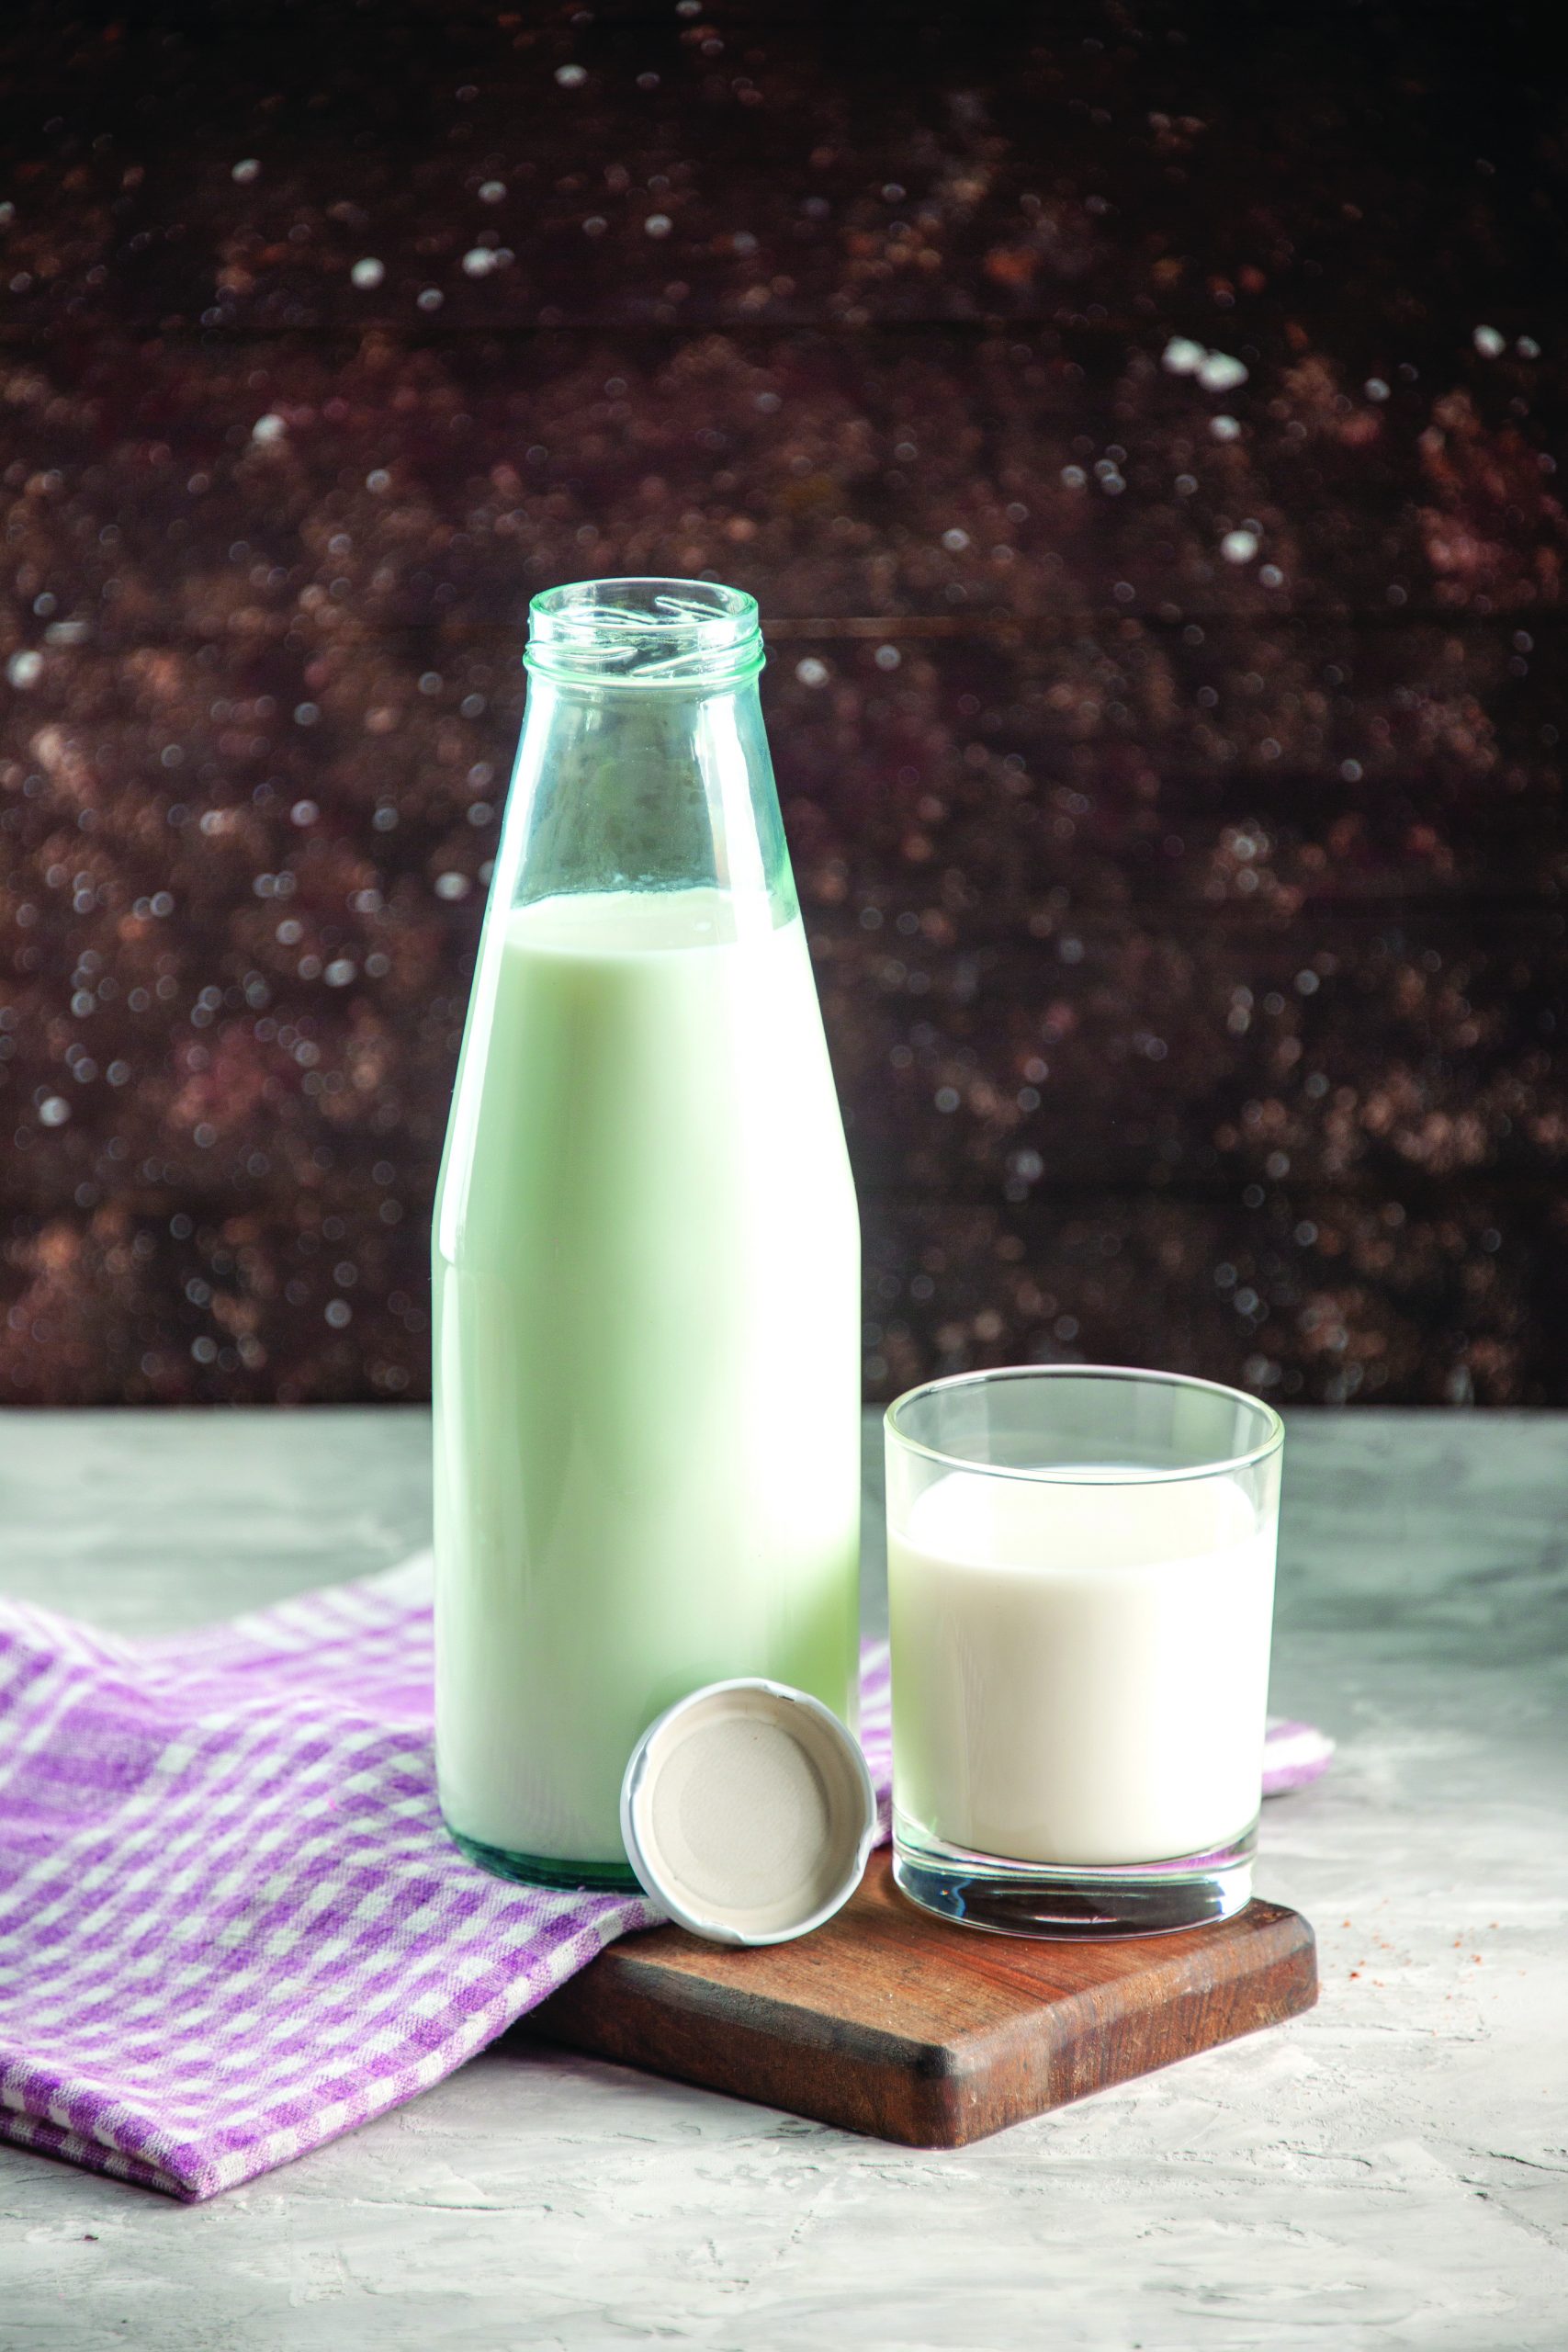 Vertical view of open glass bottle and cup filled with milk on p